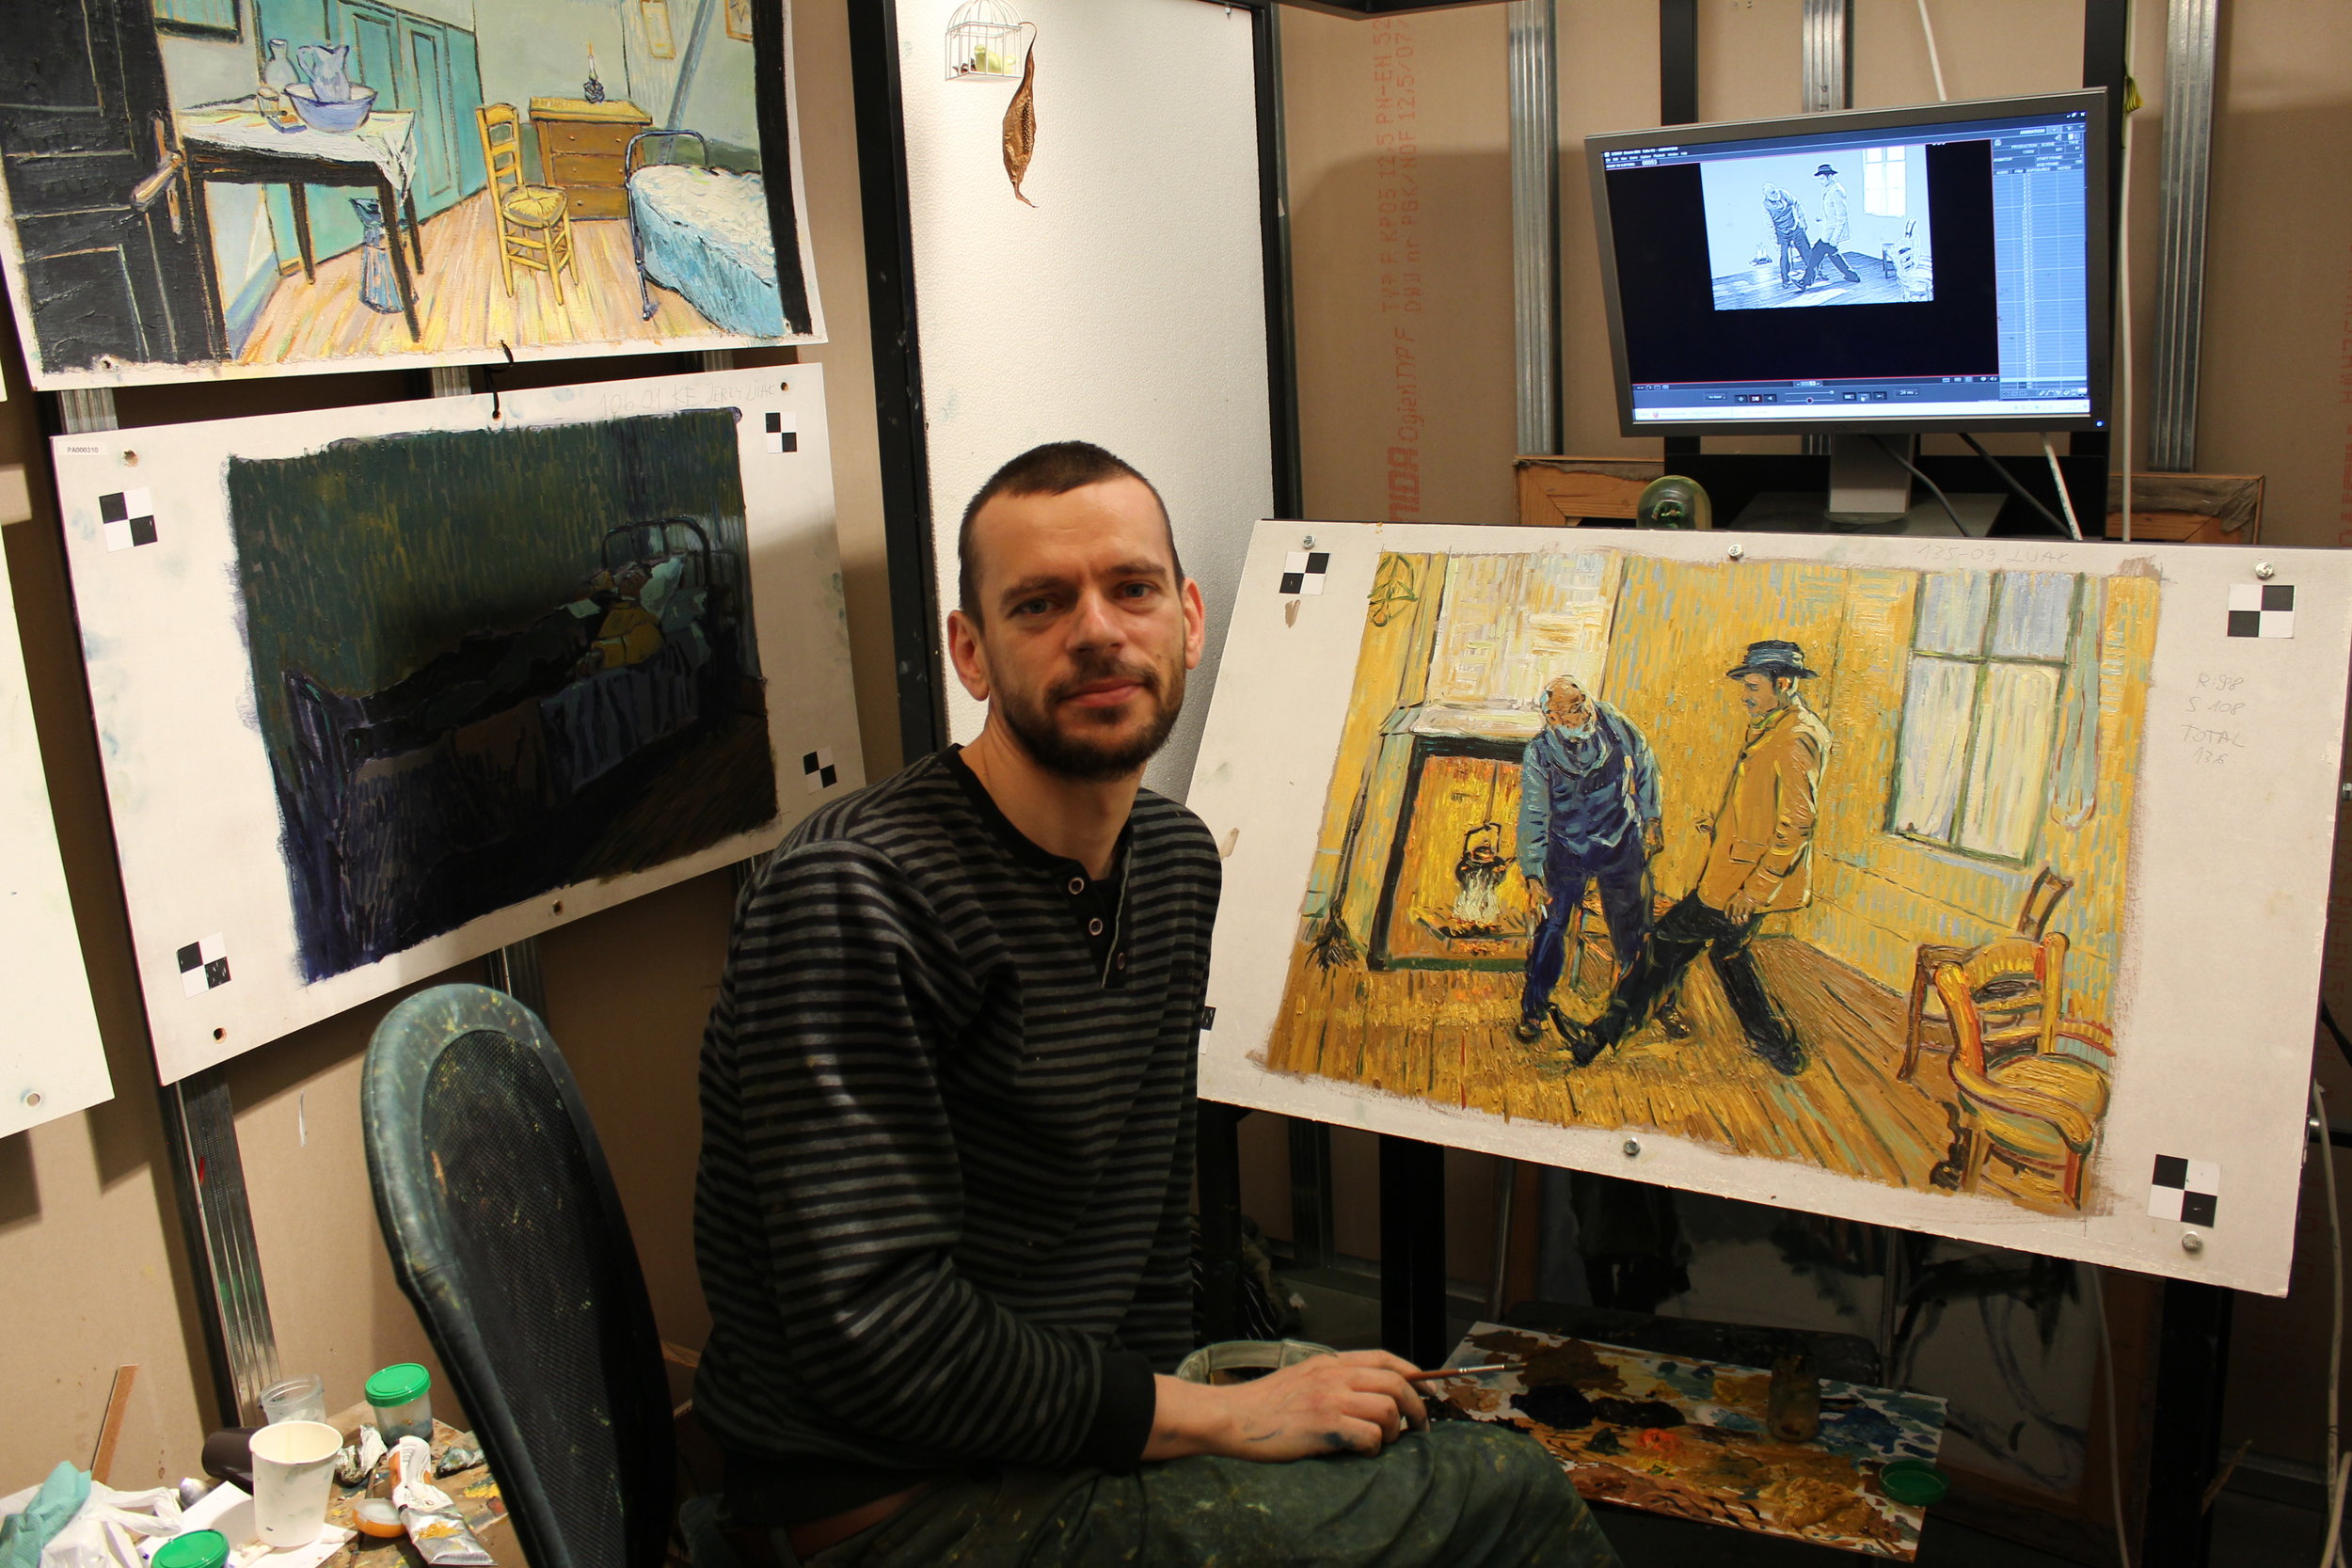  Behind the scenes images of the painting animators behind the award-winning film,  Loving Vincent  - courtesy of BreakThru Films 